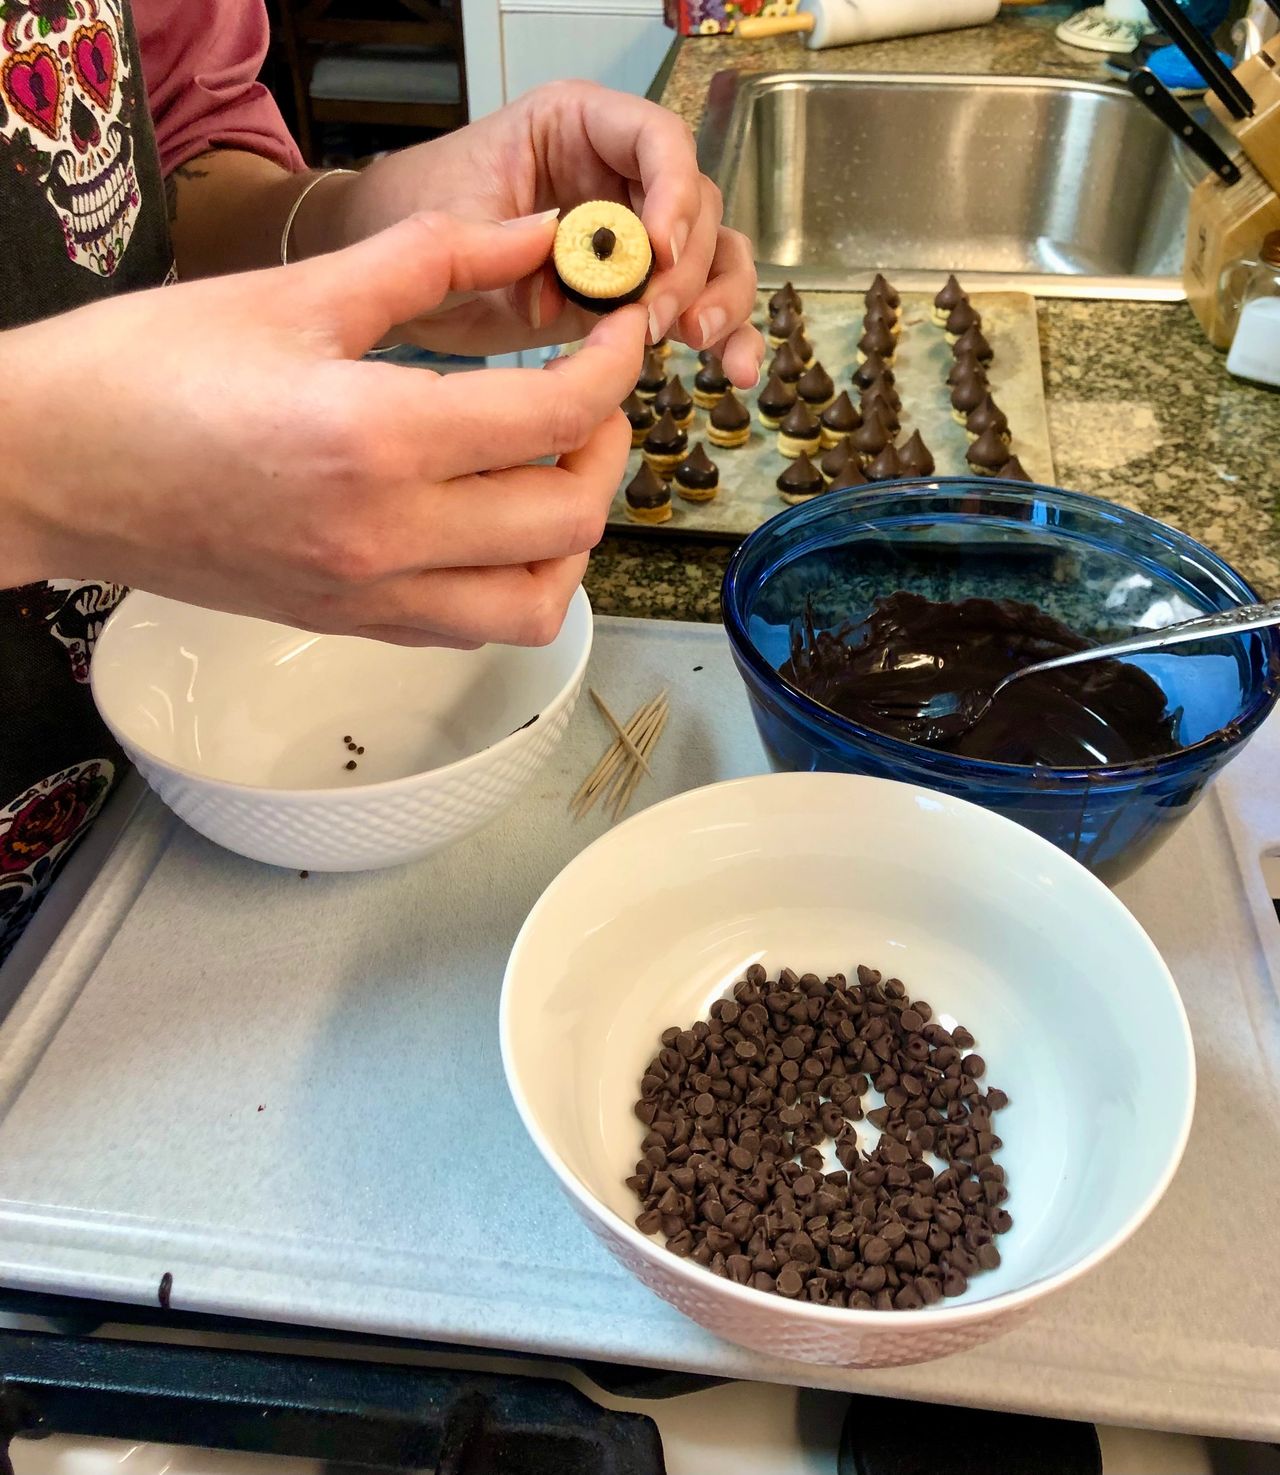 Gluing on the mini chocolate chips.